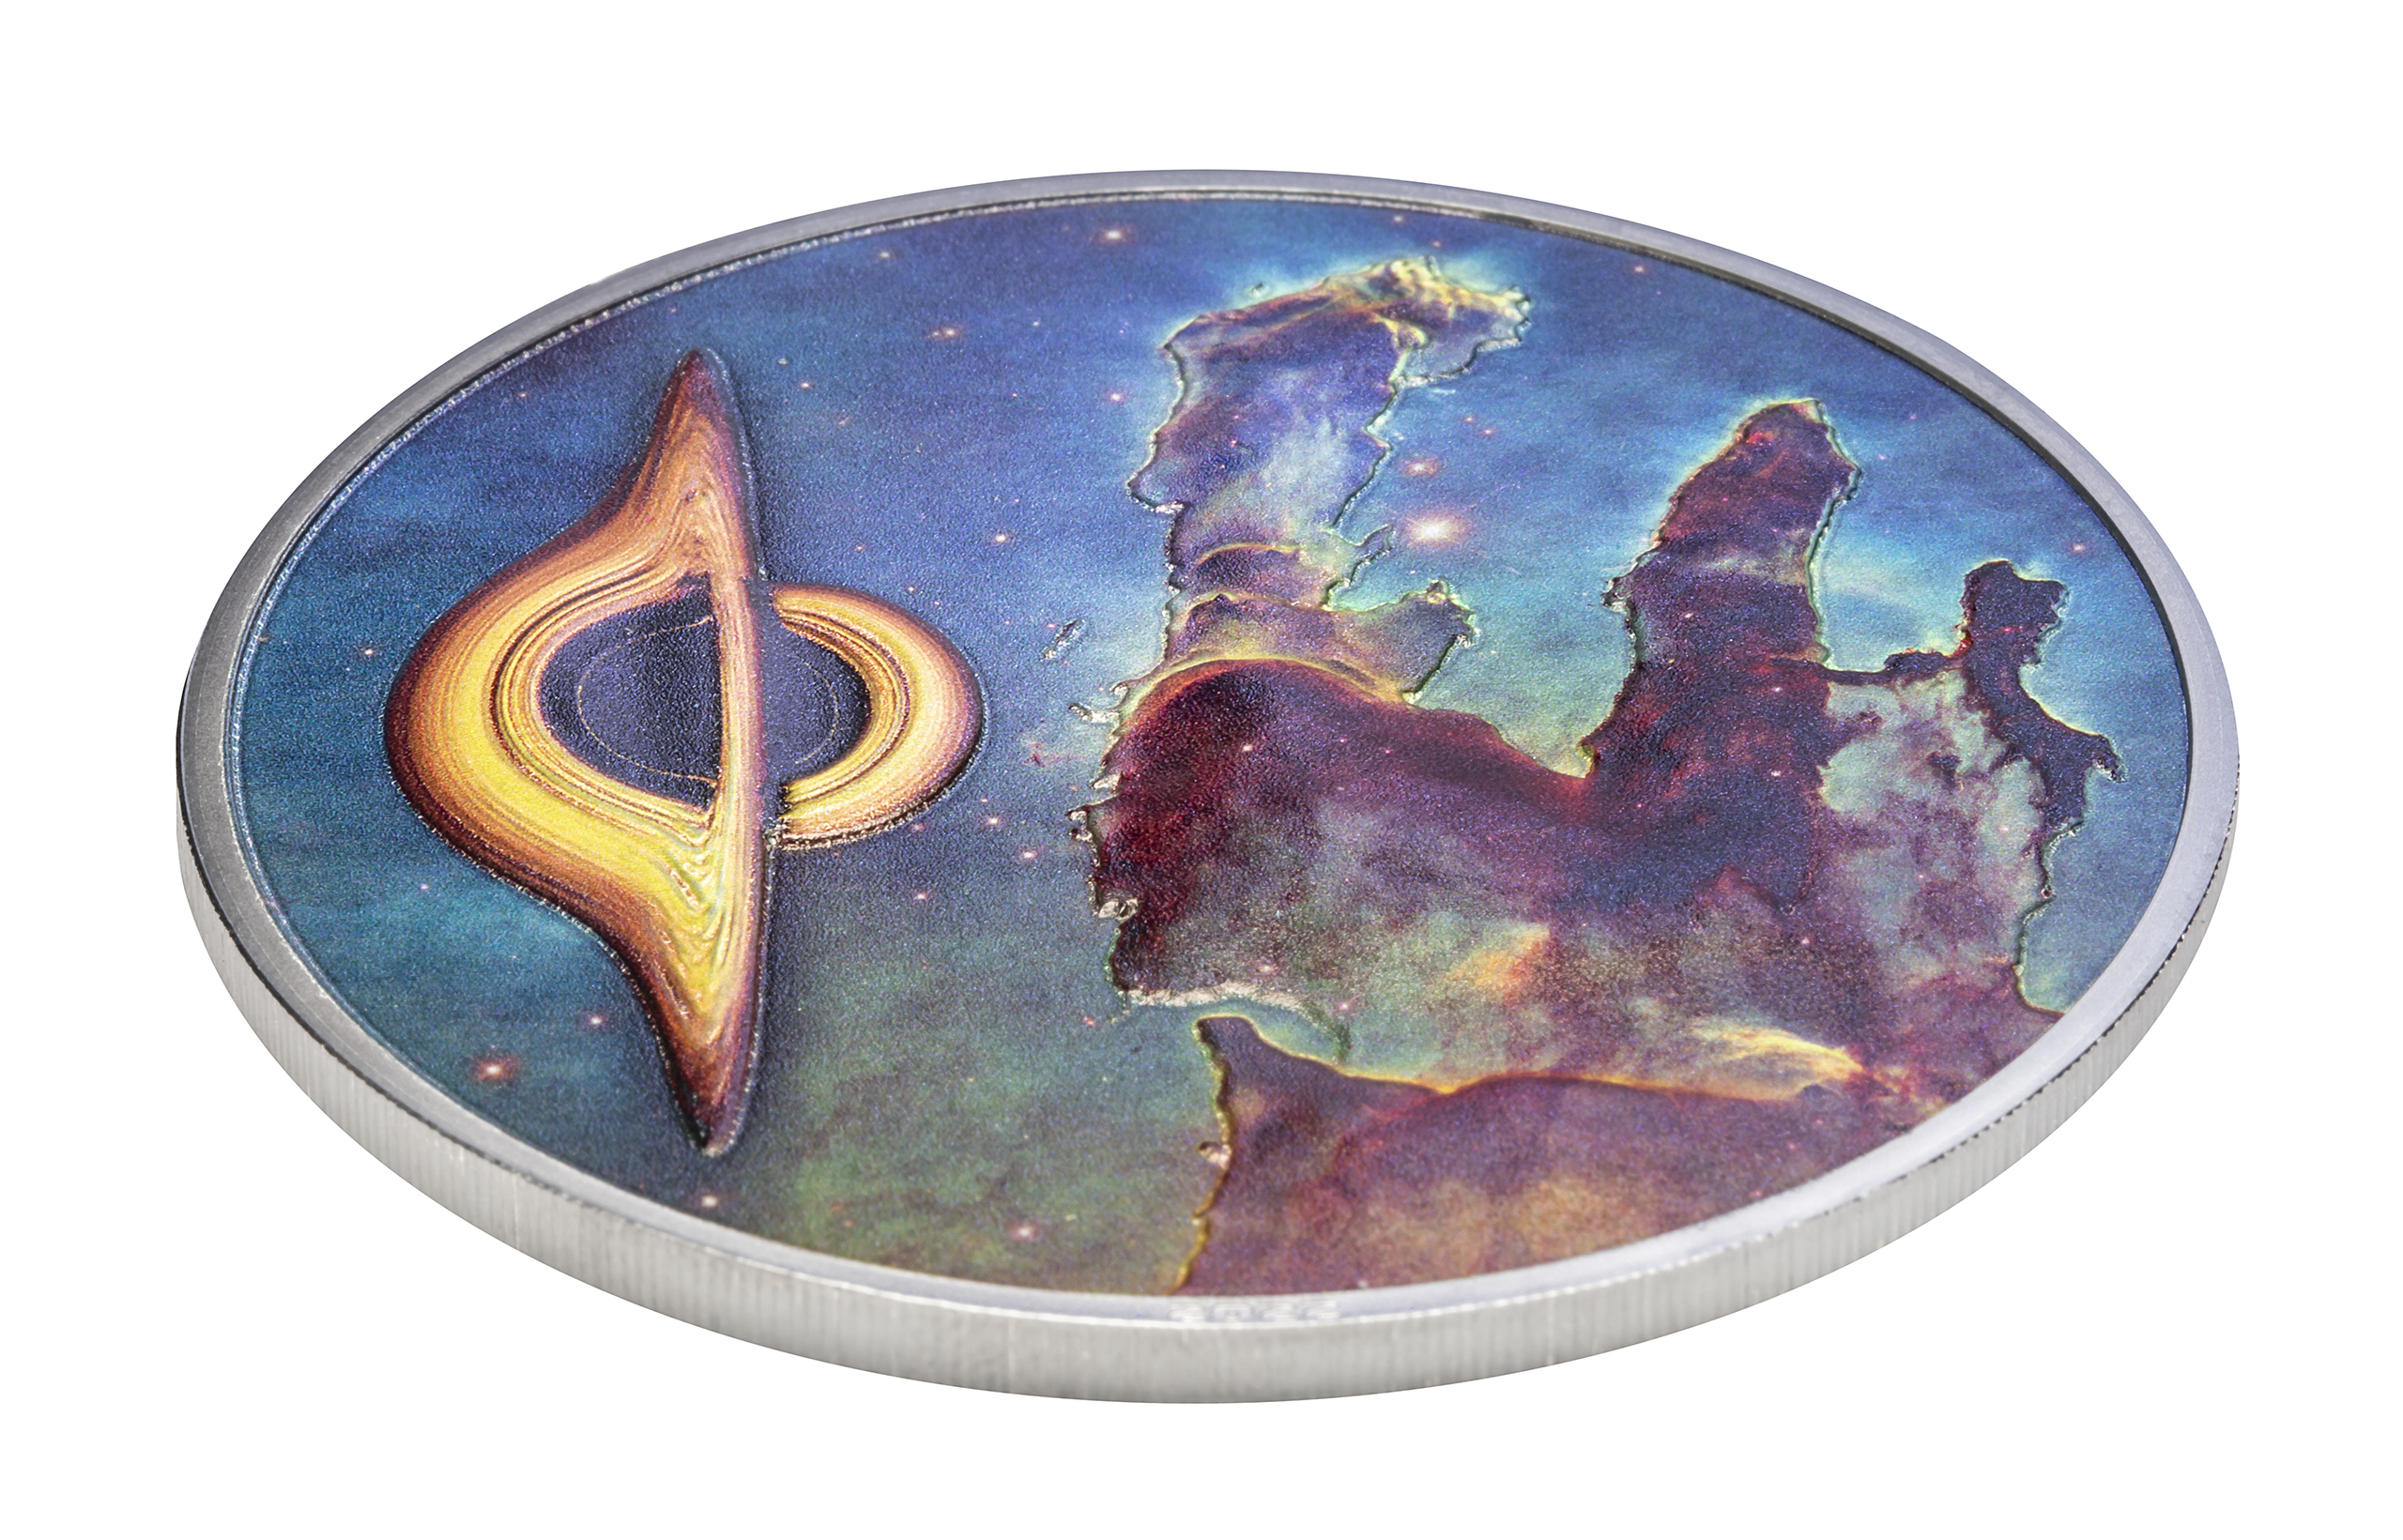 Palau 2022 20 Dollars Black Hole & Pillars of Creation Nebula - Space the Final Frontier silver black proof coin